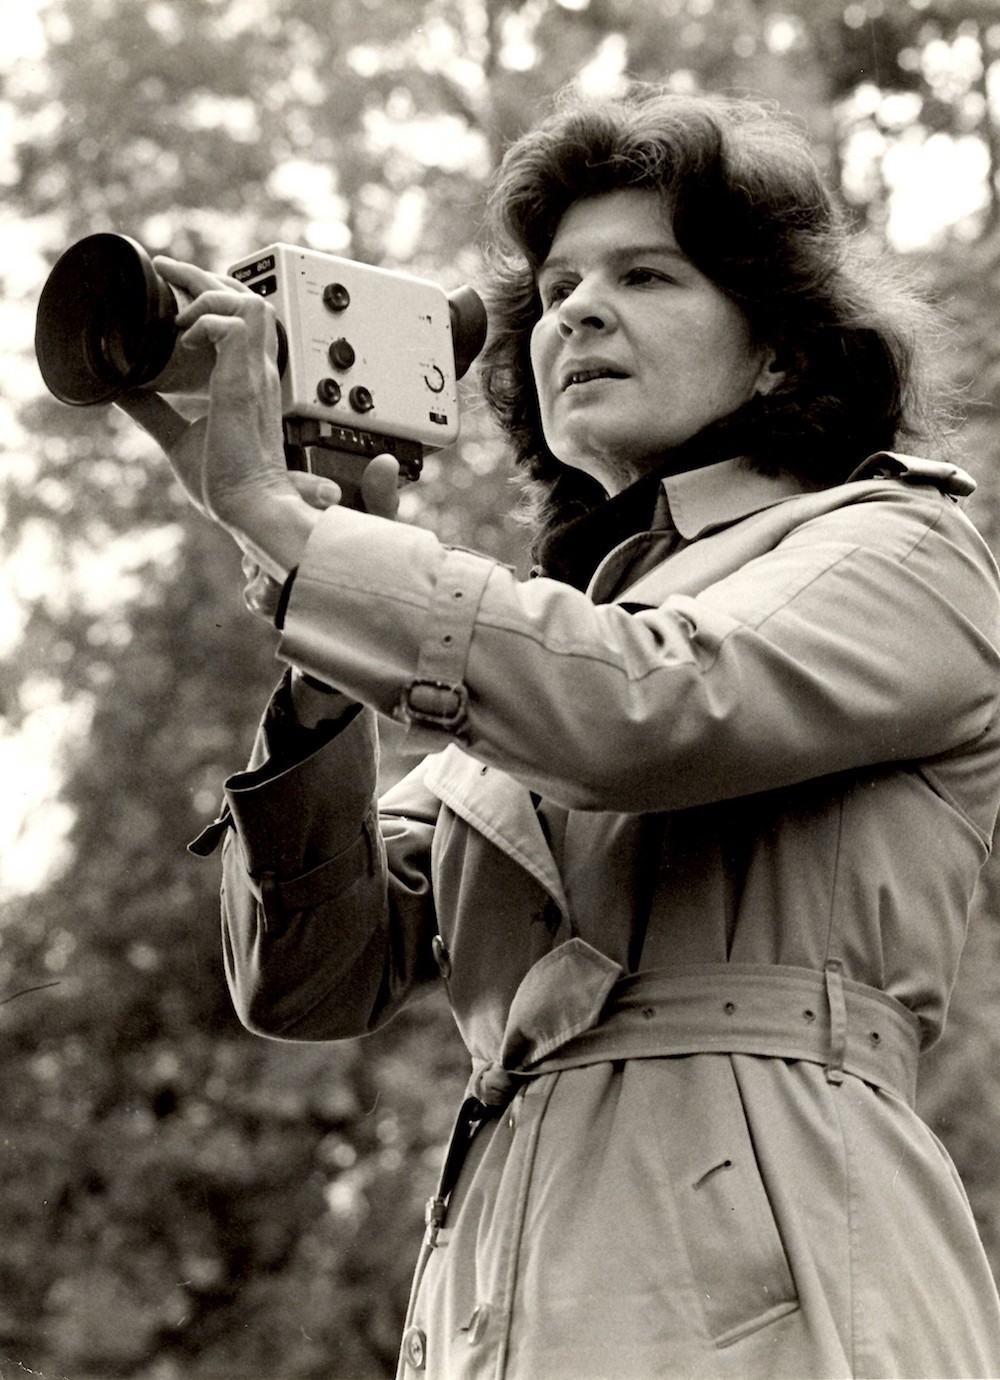 A sepia toned photo of a brown haired light skinned woman holding a camera.